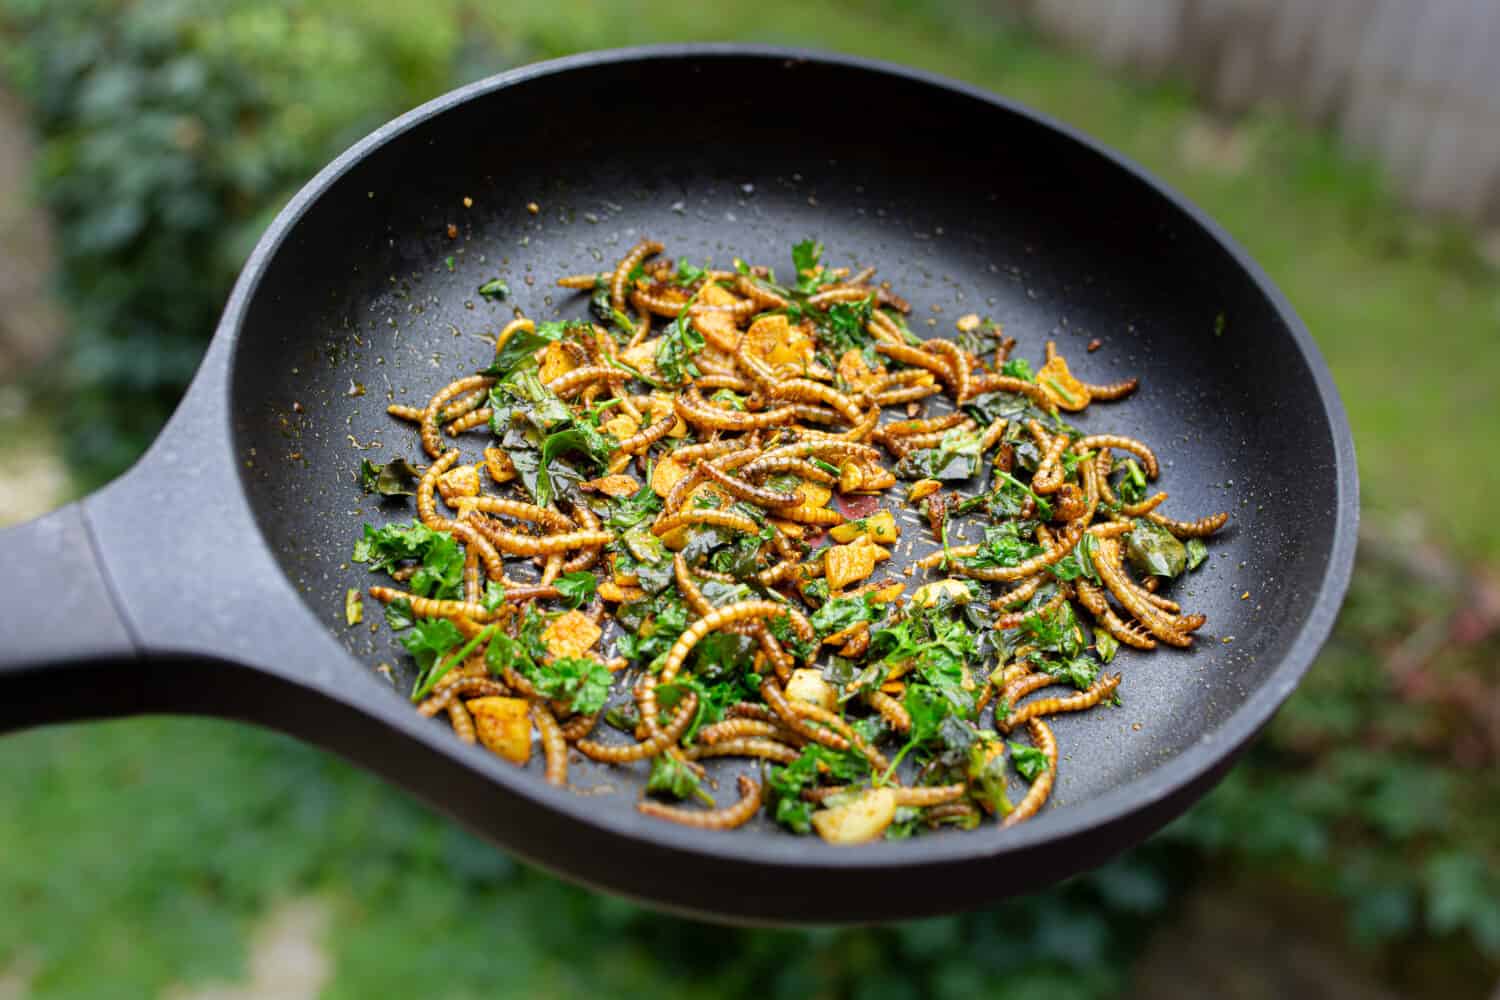 frying of edible mealworm larvae mixed with spice and herbs